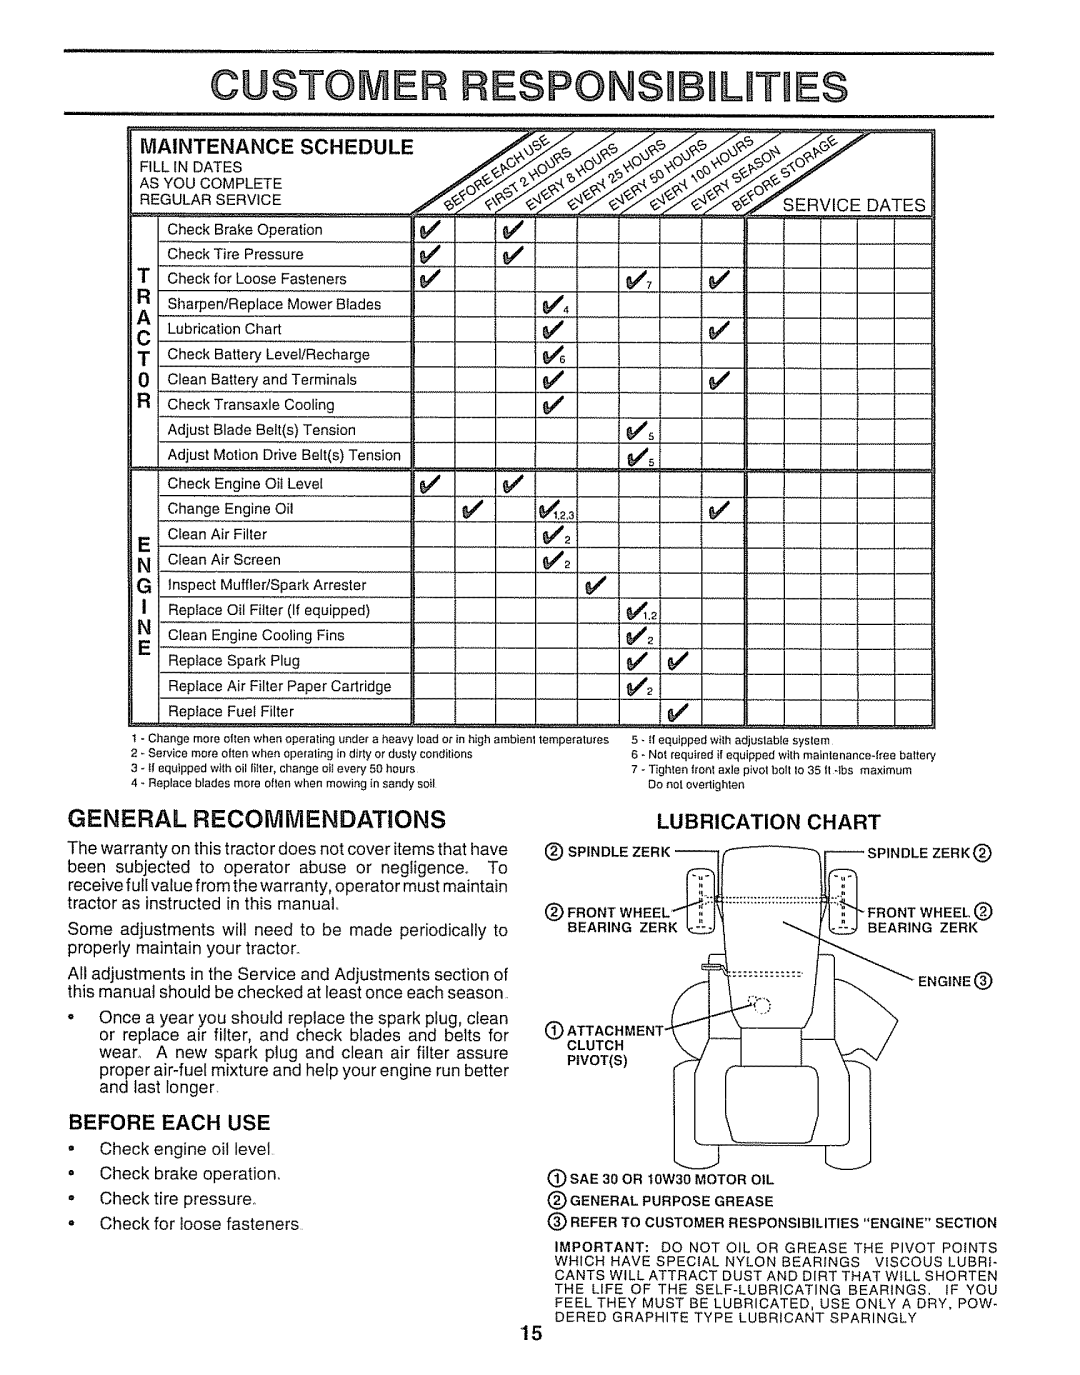 Craftsman 917.25651 owner manual Customer, Respons, General Recommendations, Lubrication, Chart, Before Each Use, L Es 